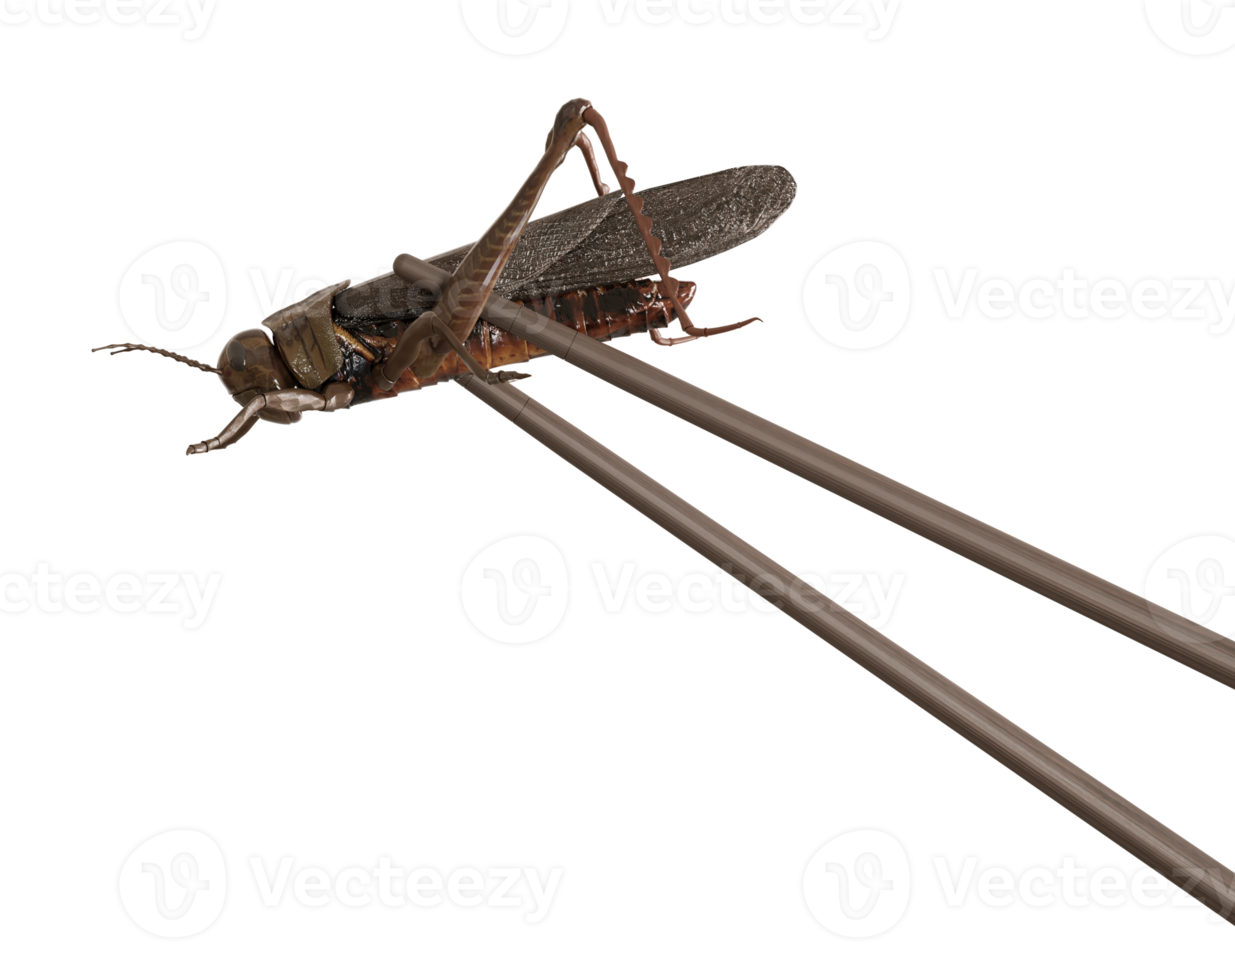 Cricket and chopsticks on transparent background. Edible insects, as snack, good source of protein. Grasshopper. Entomophagy, insectivory concept. Fried insects. Close up view. 3D rendering. png